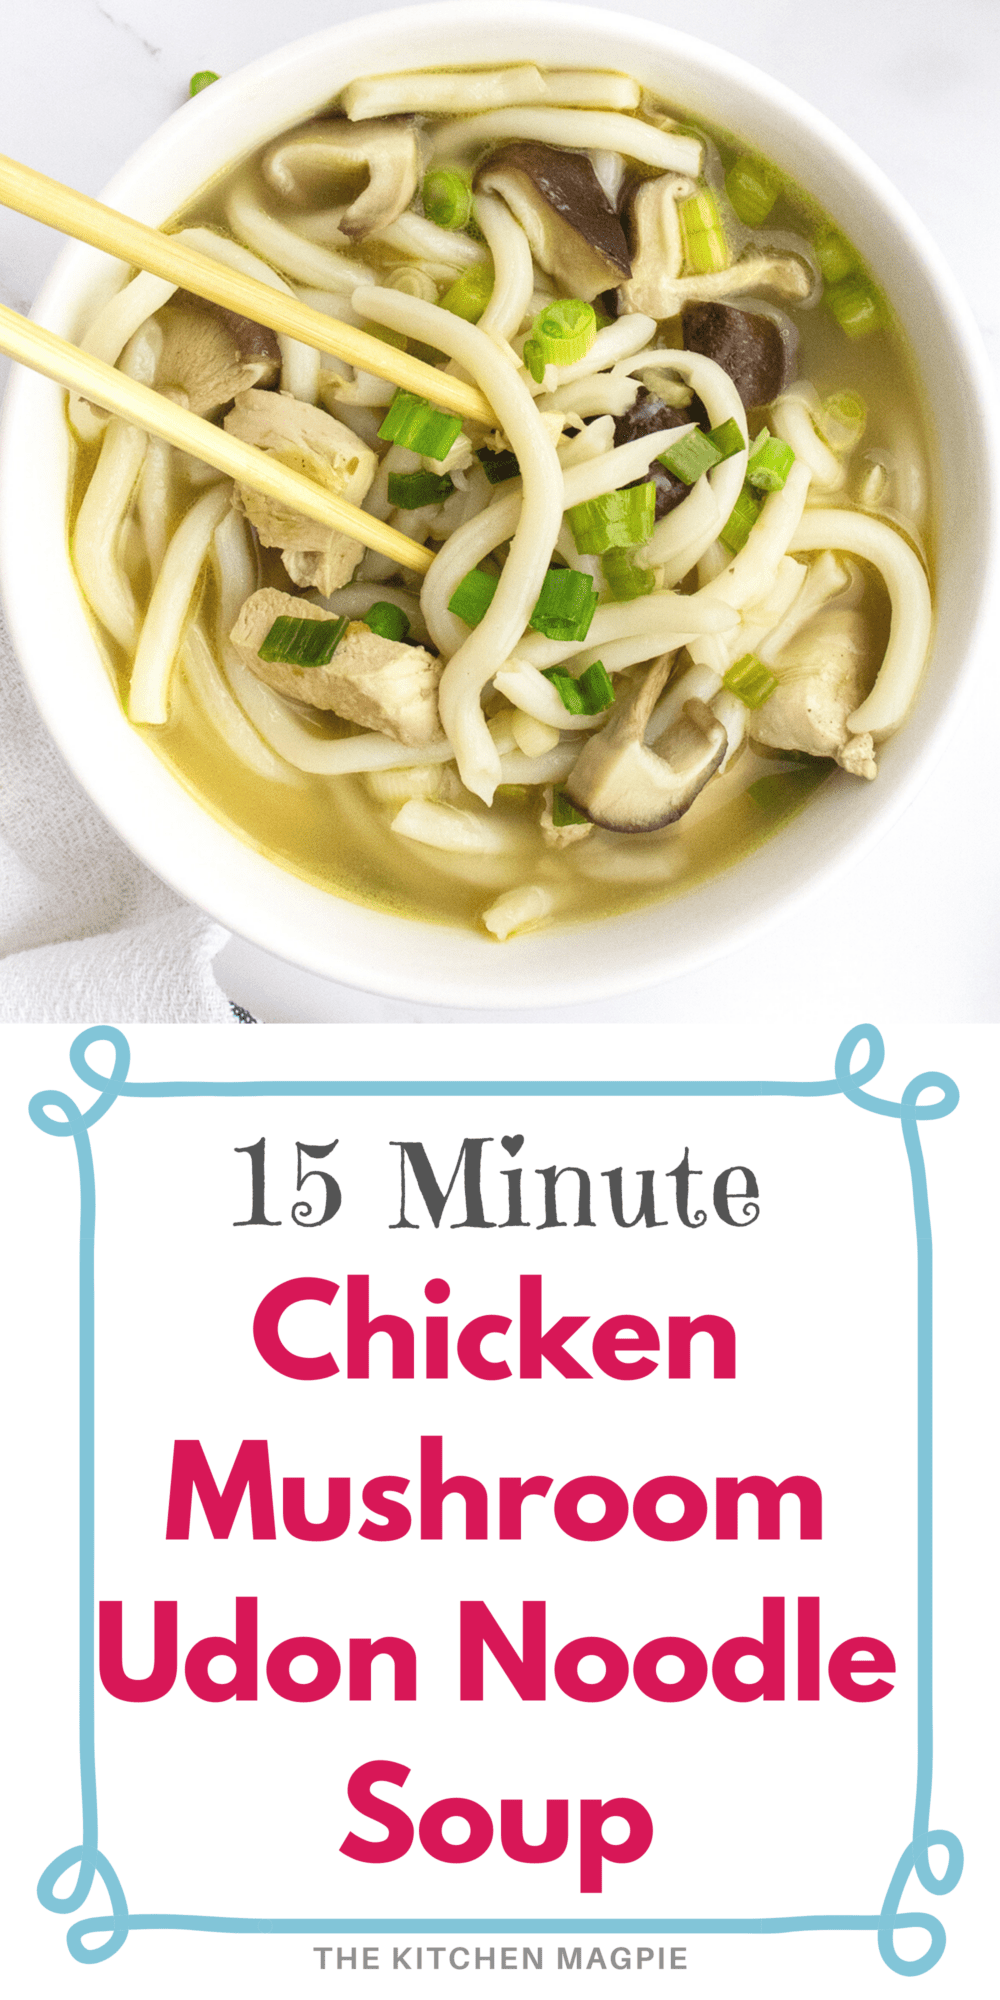 Quick, easy and delicious homemade chicken mushroom Udon noodle soup! This is now a new family favorite!